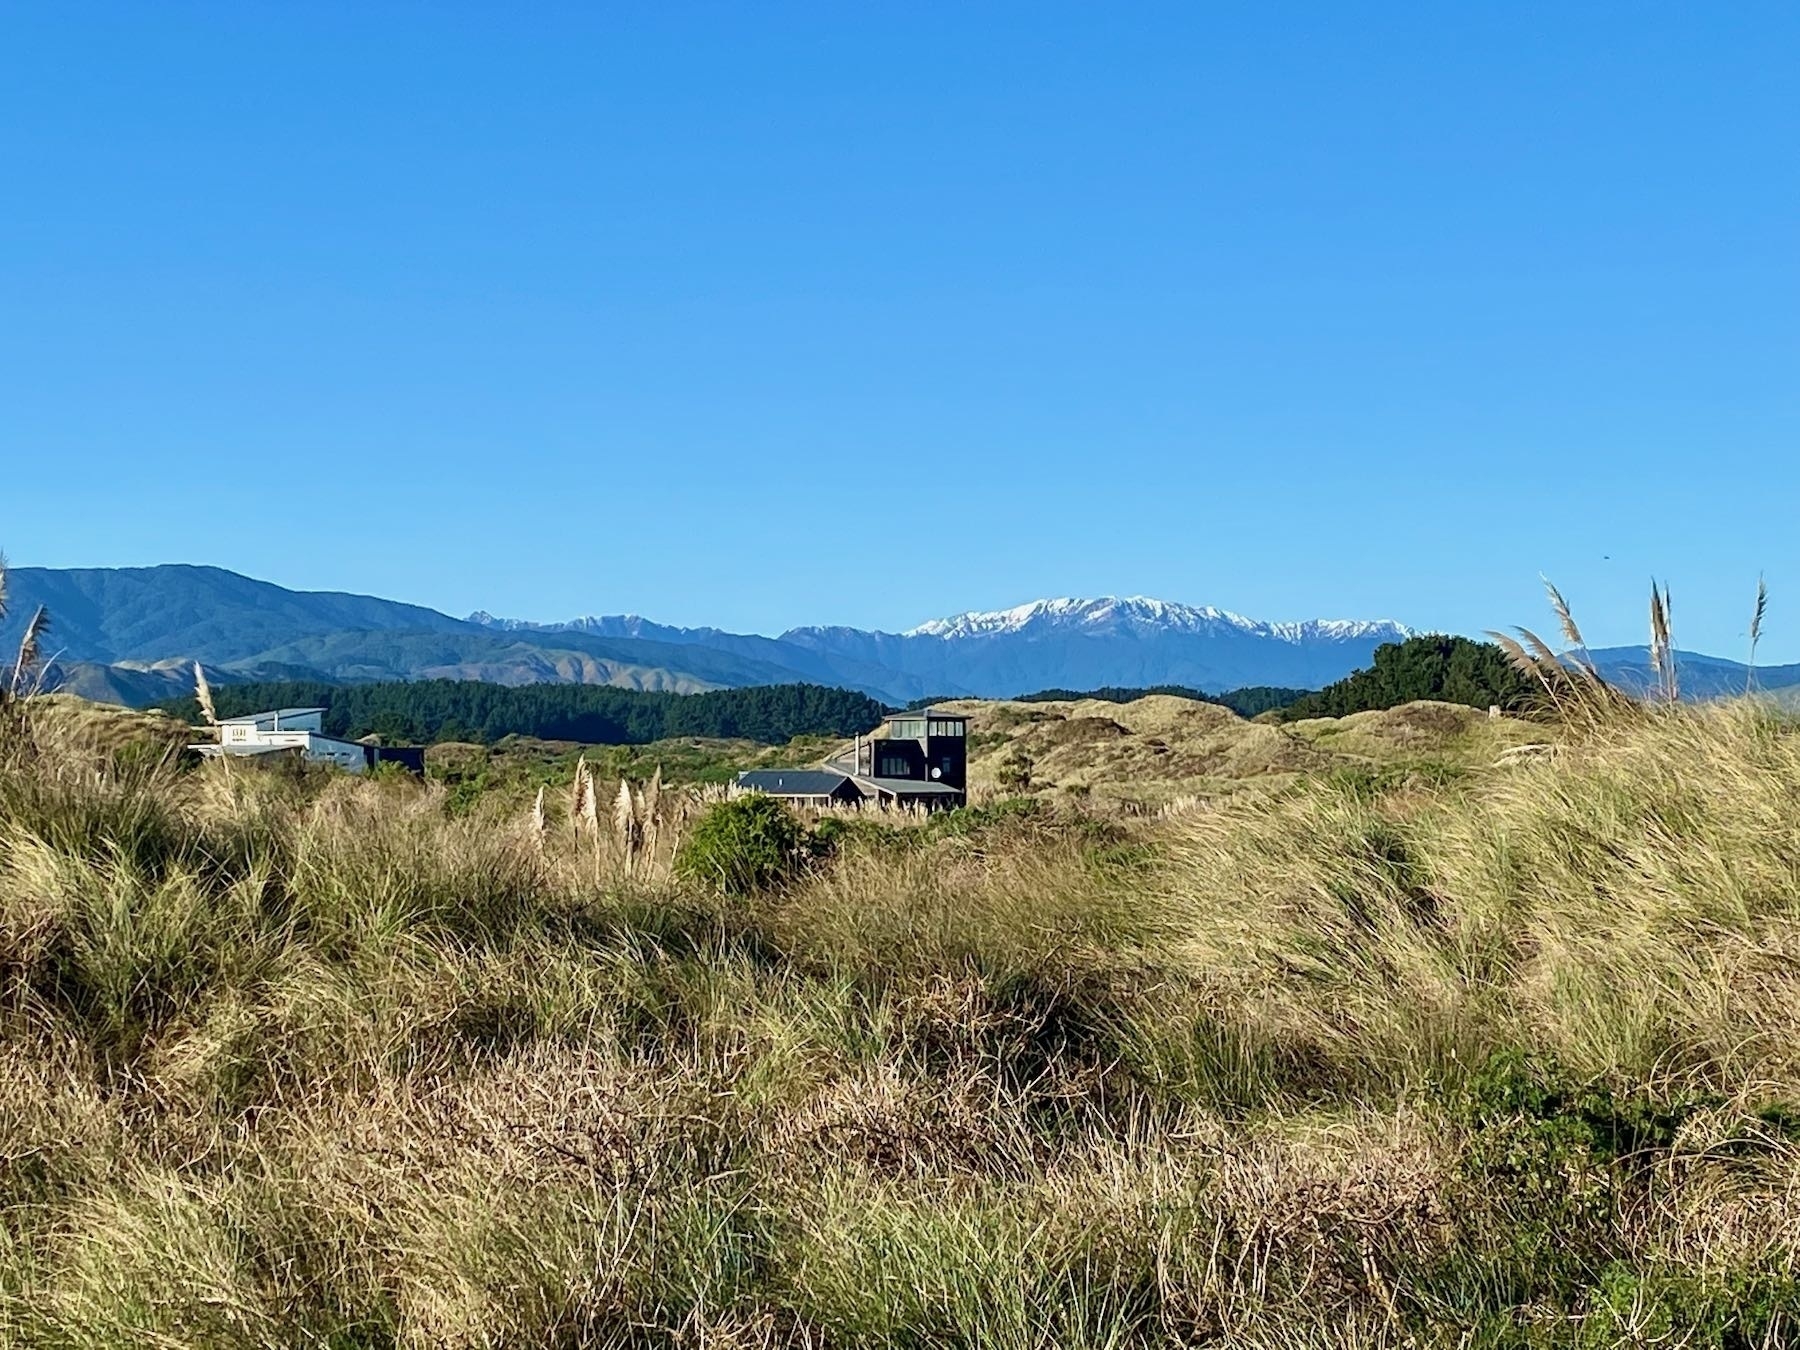 A view across dunes and paddocks to the snowy peak of a mountain. 